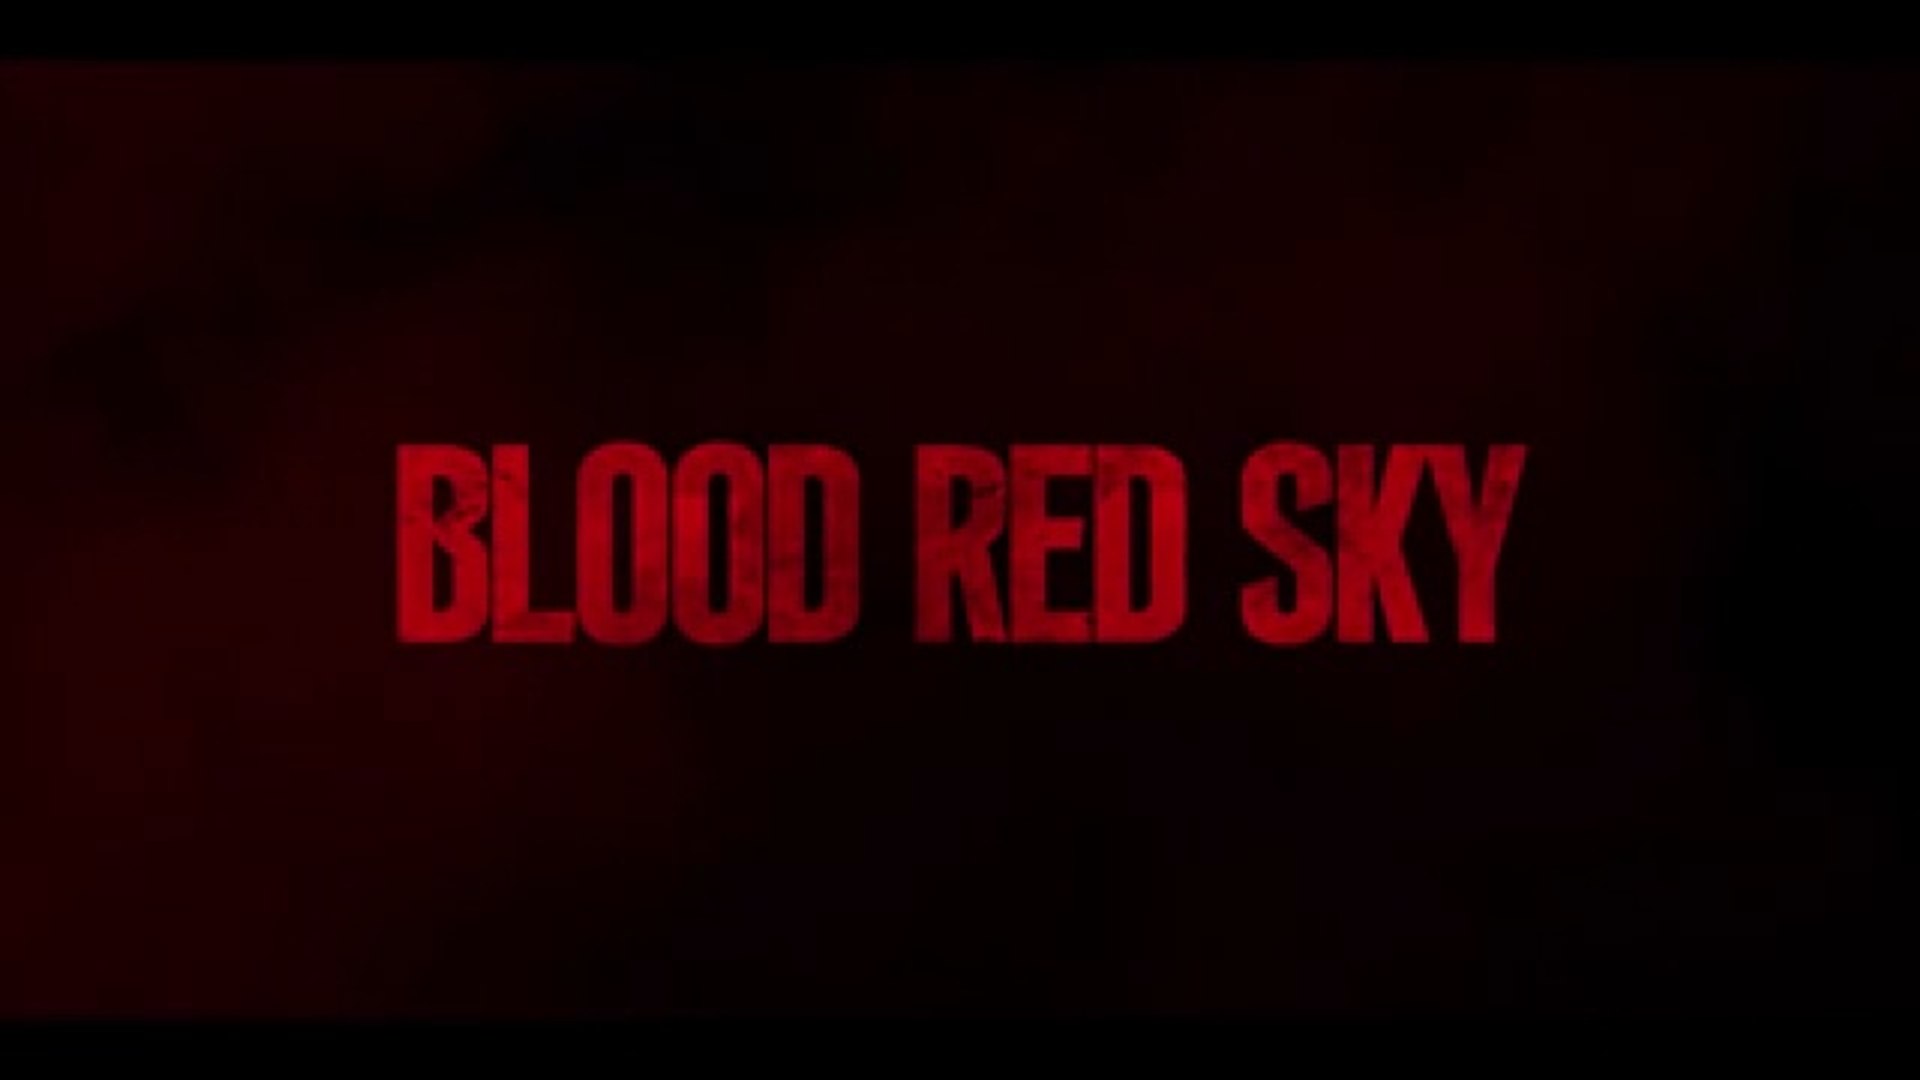 Peri Baumeister Blood Red Sky Wallpapers